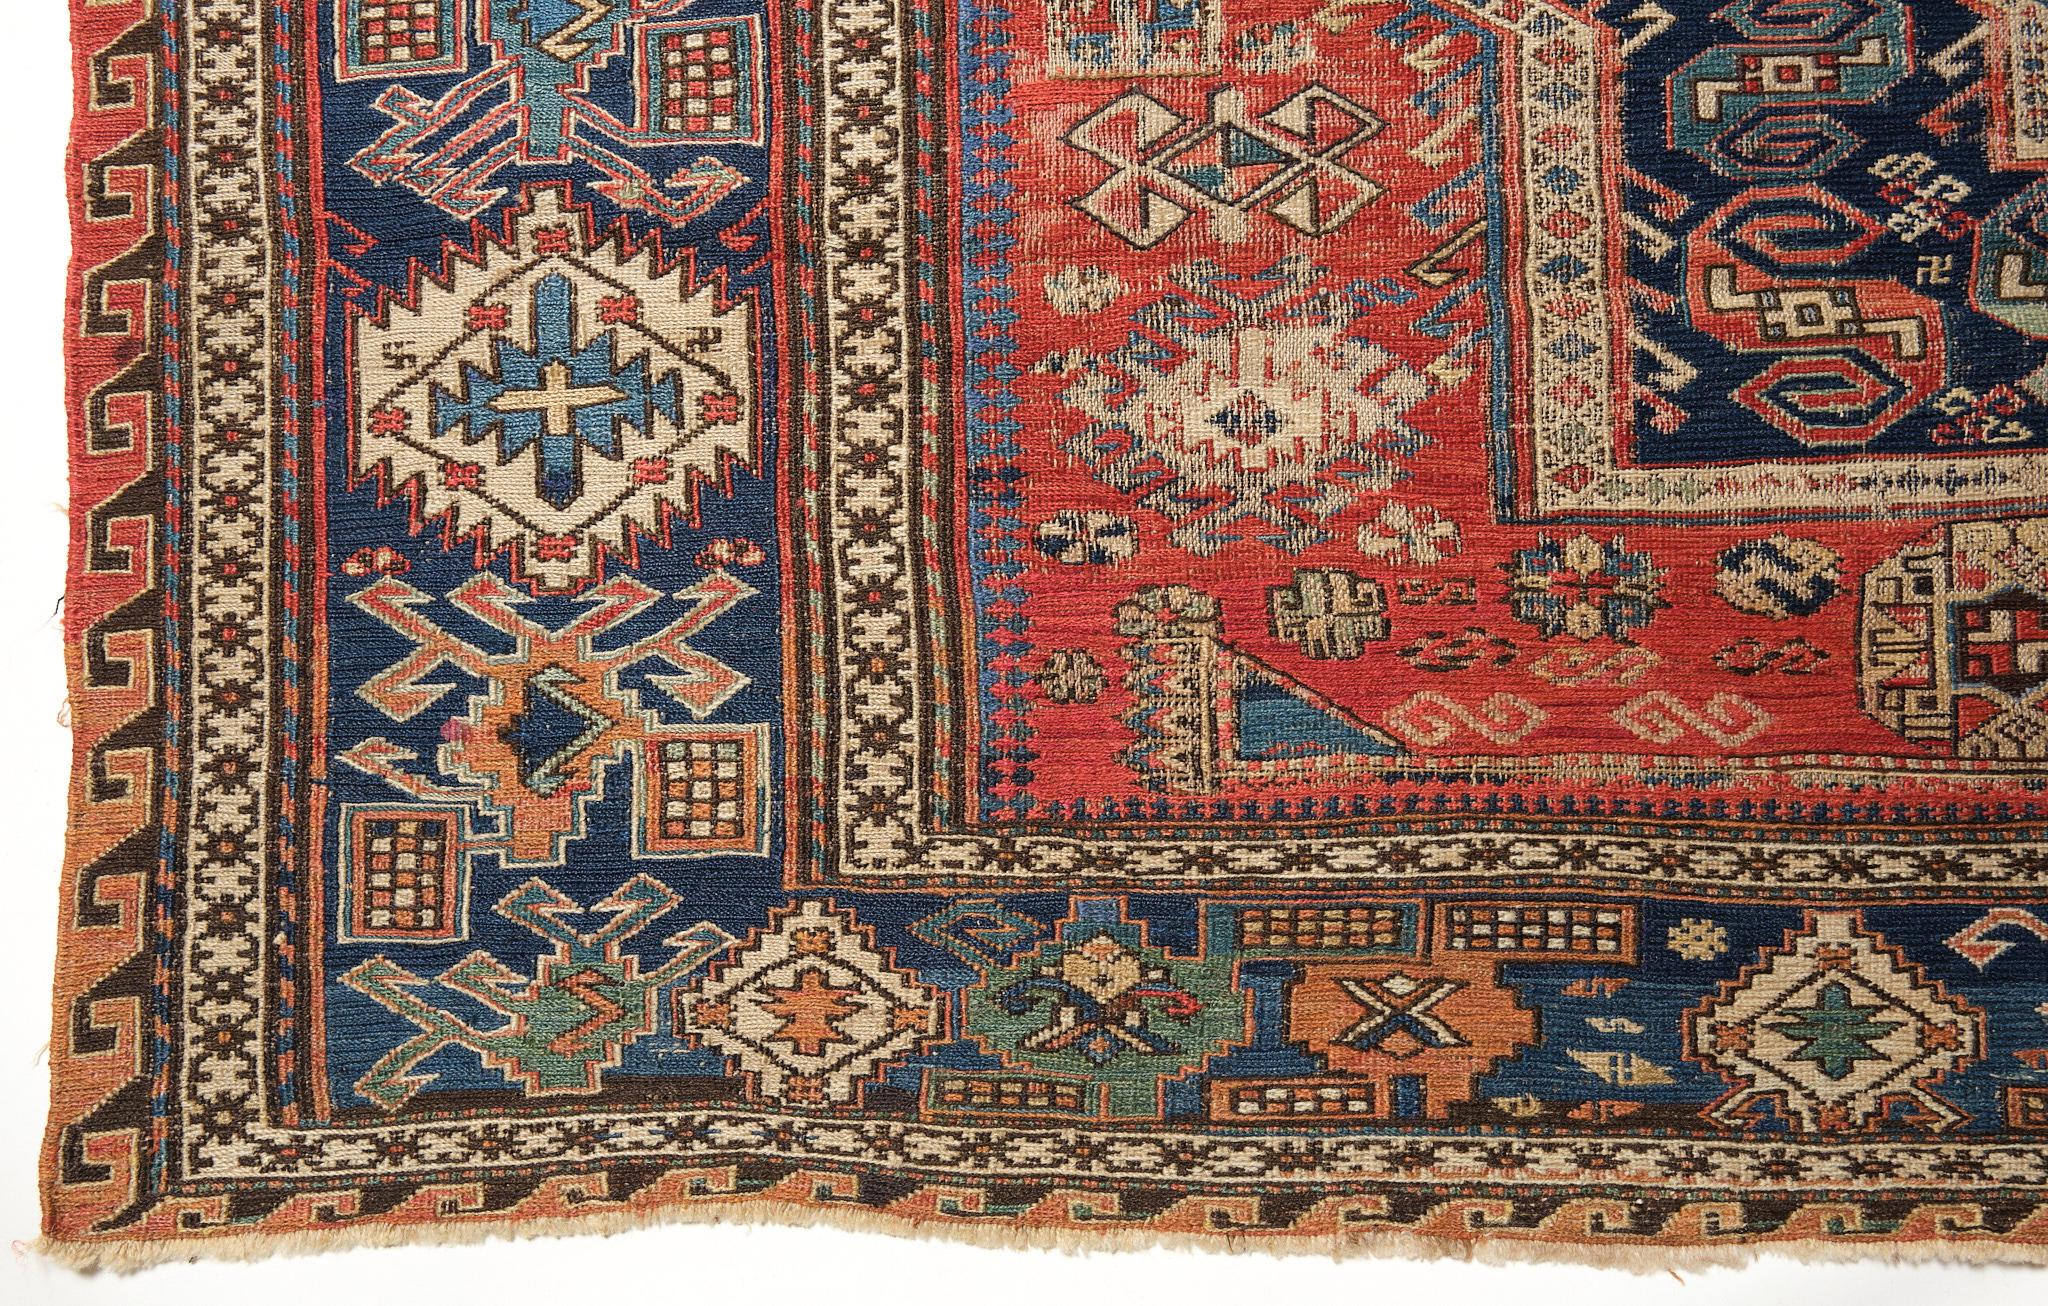 This is an Antique Soumak ( Sumak, Sumac ) Kilim from the Caucasus region with a rare and beautiful color composition.

Of the four countries that make up the Caucasus, Azerbaijan produces the most kilims, and the land has a long history of